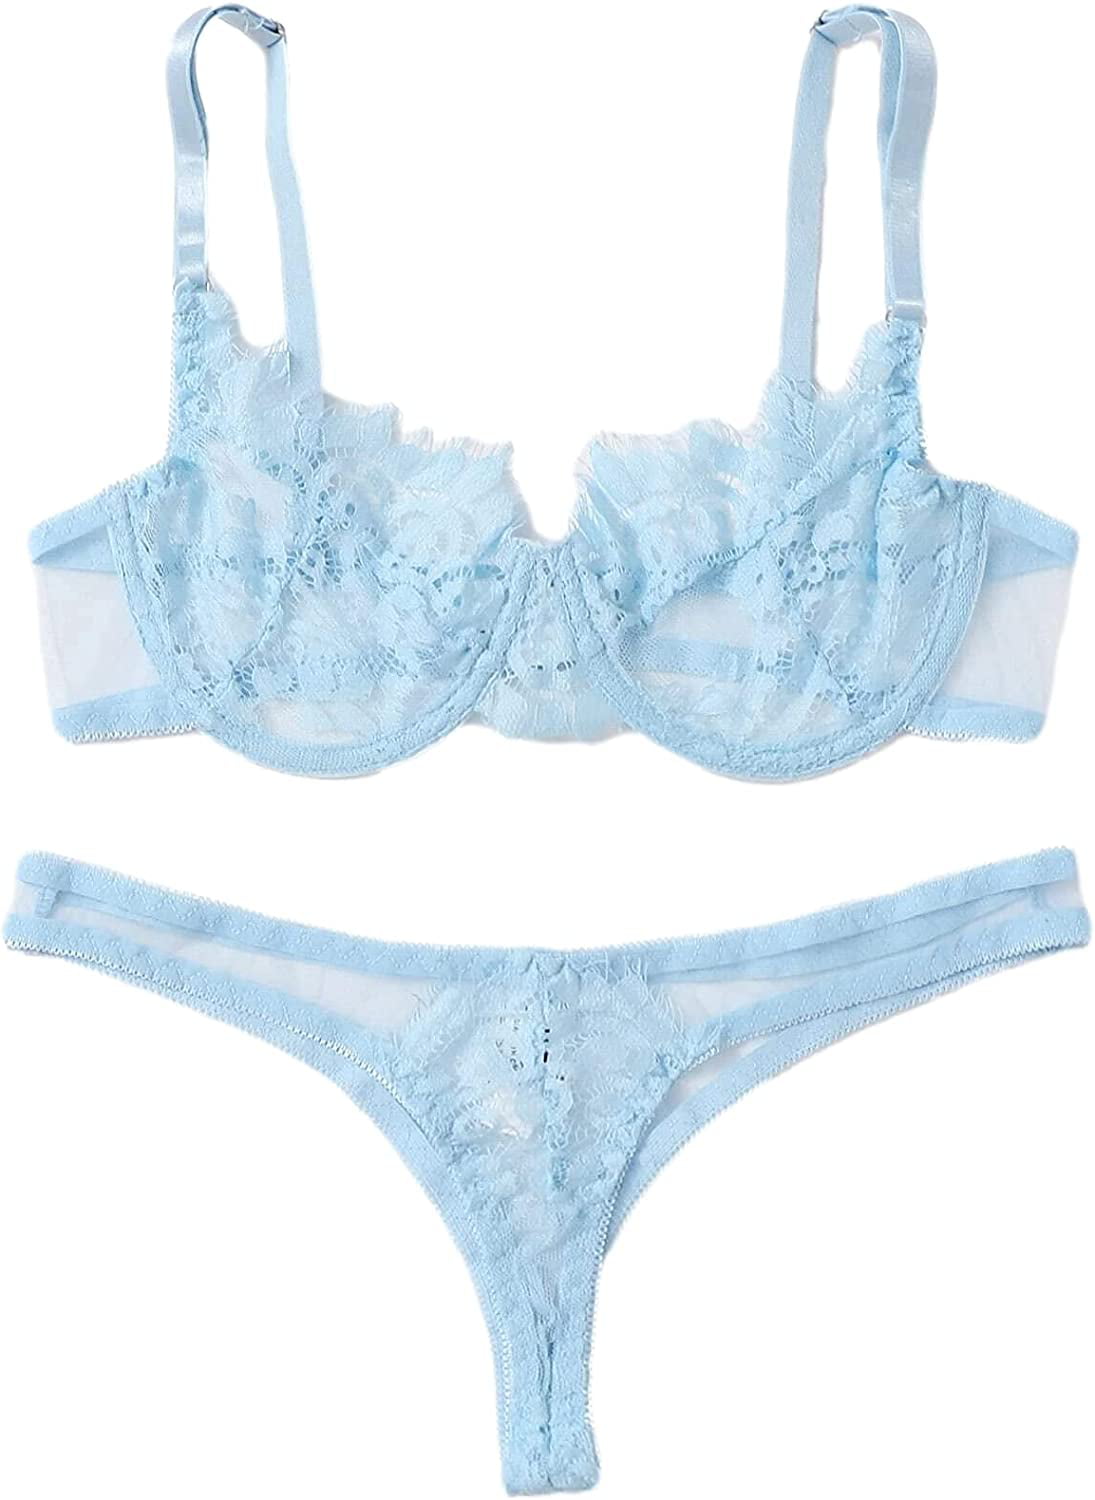 Lilosy Sexy Underwire Push Up Scallop Floral Lace Sheer Lingerie Set ...